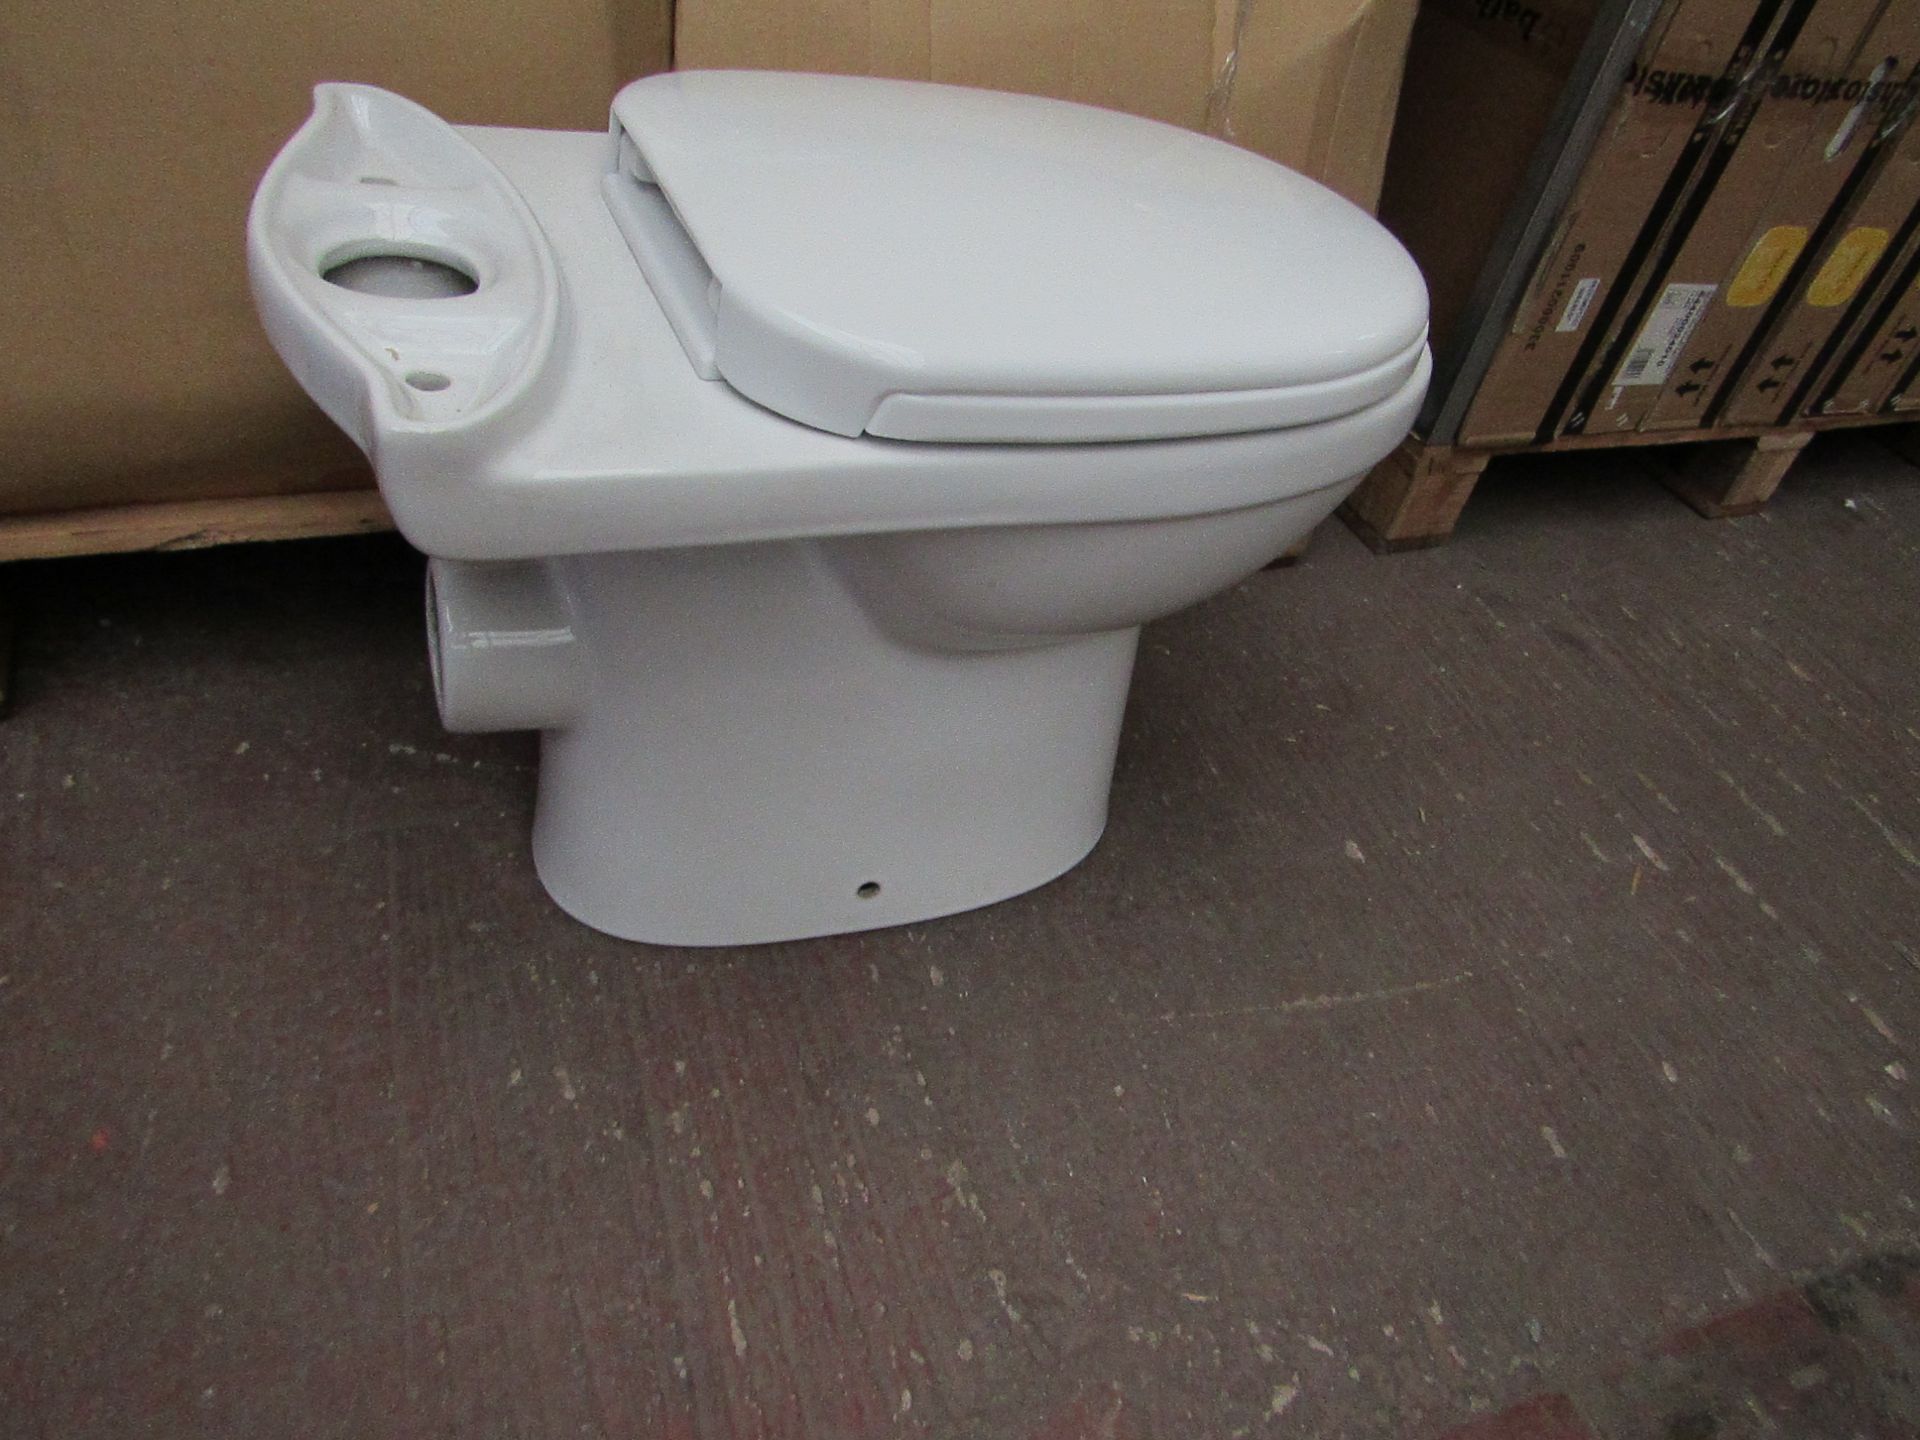 Olivia close coupled toilet pan with seat cover TA-001, new and boxed.